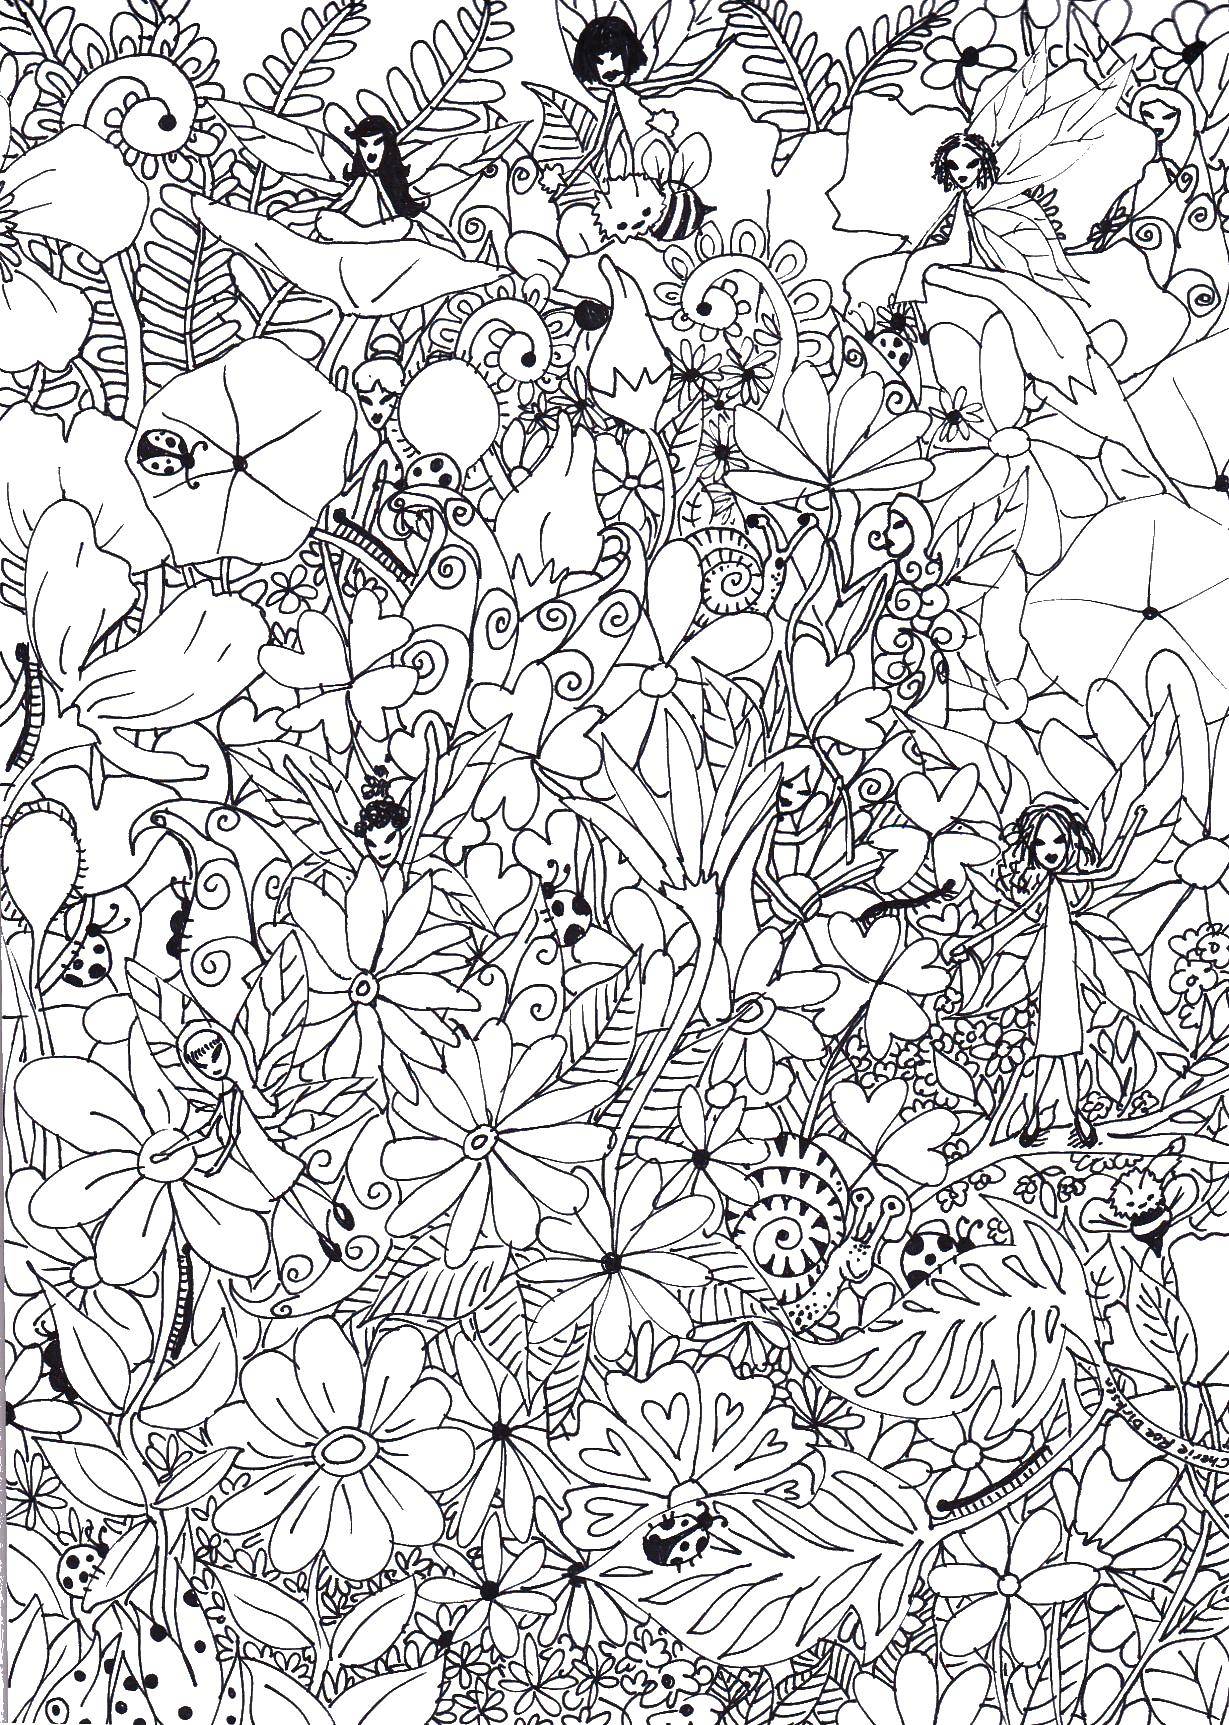 Coloring Fairies and flowers. Category flowers. Tags:  fairies, flowers.